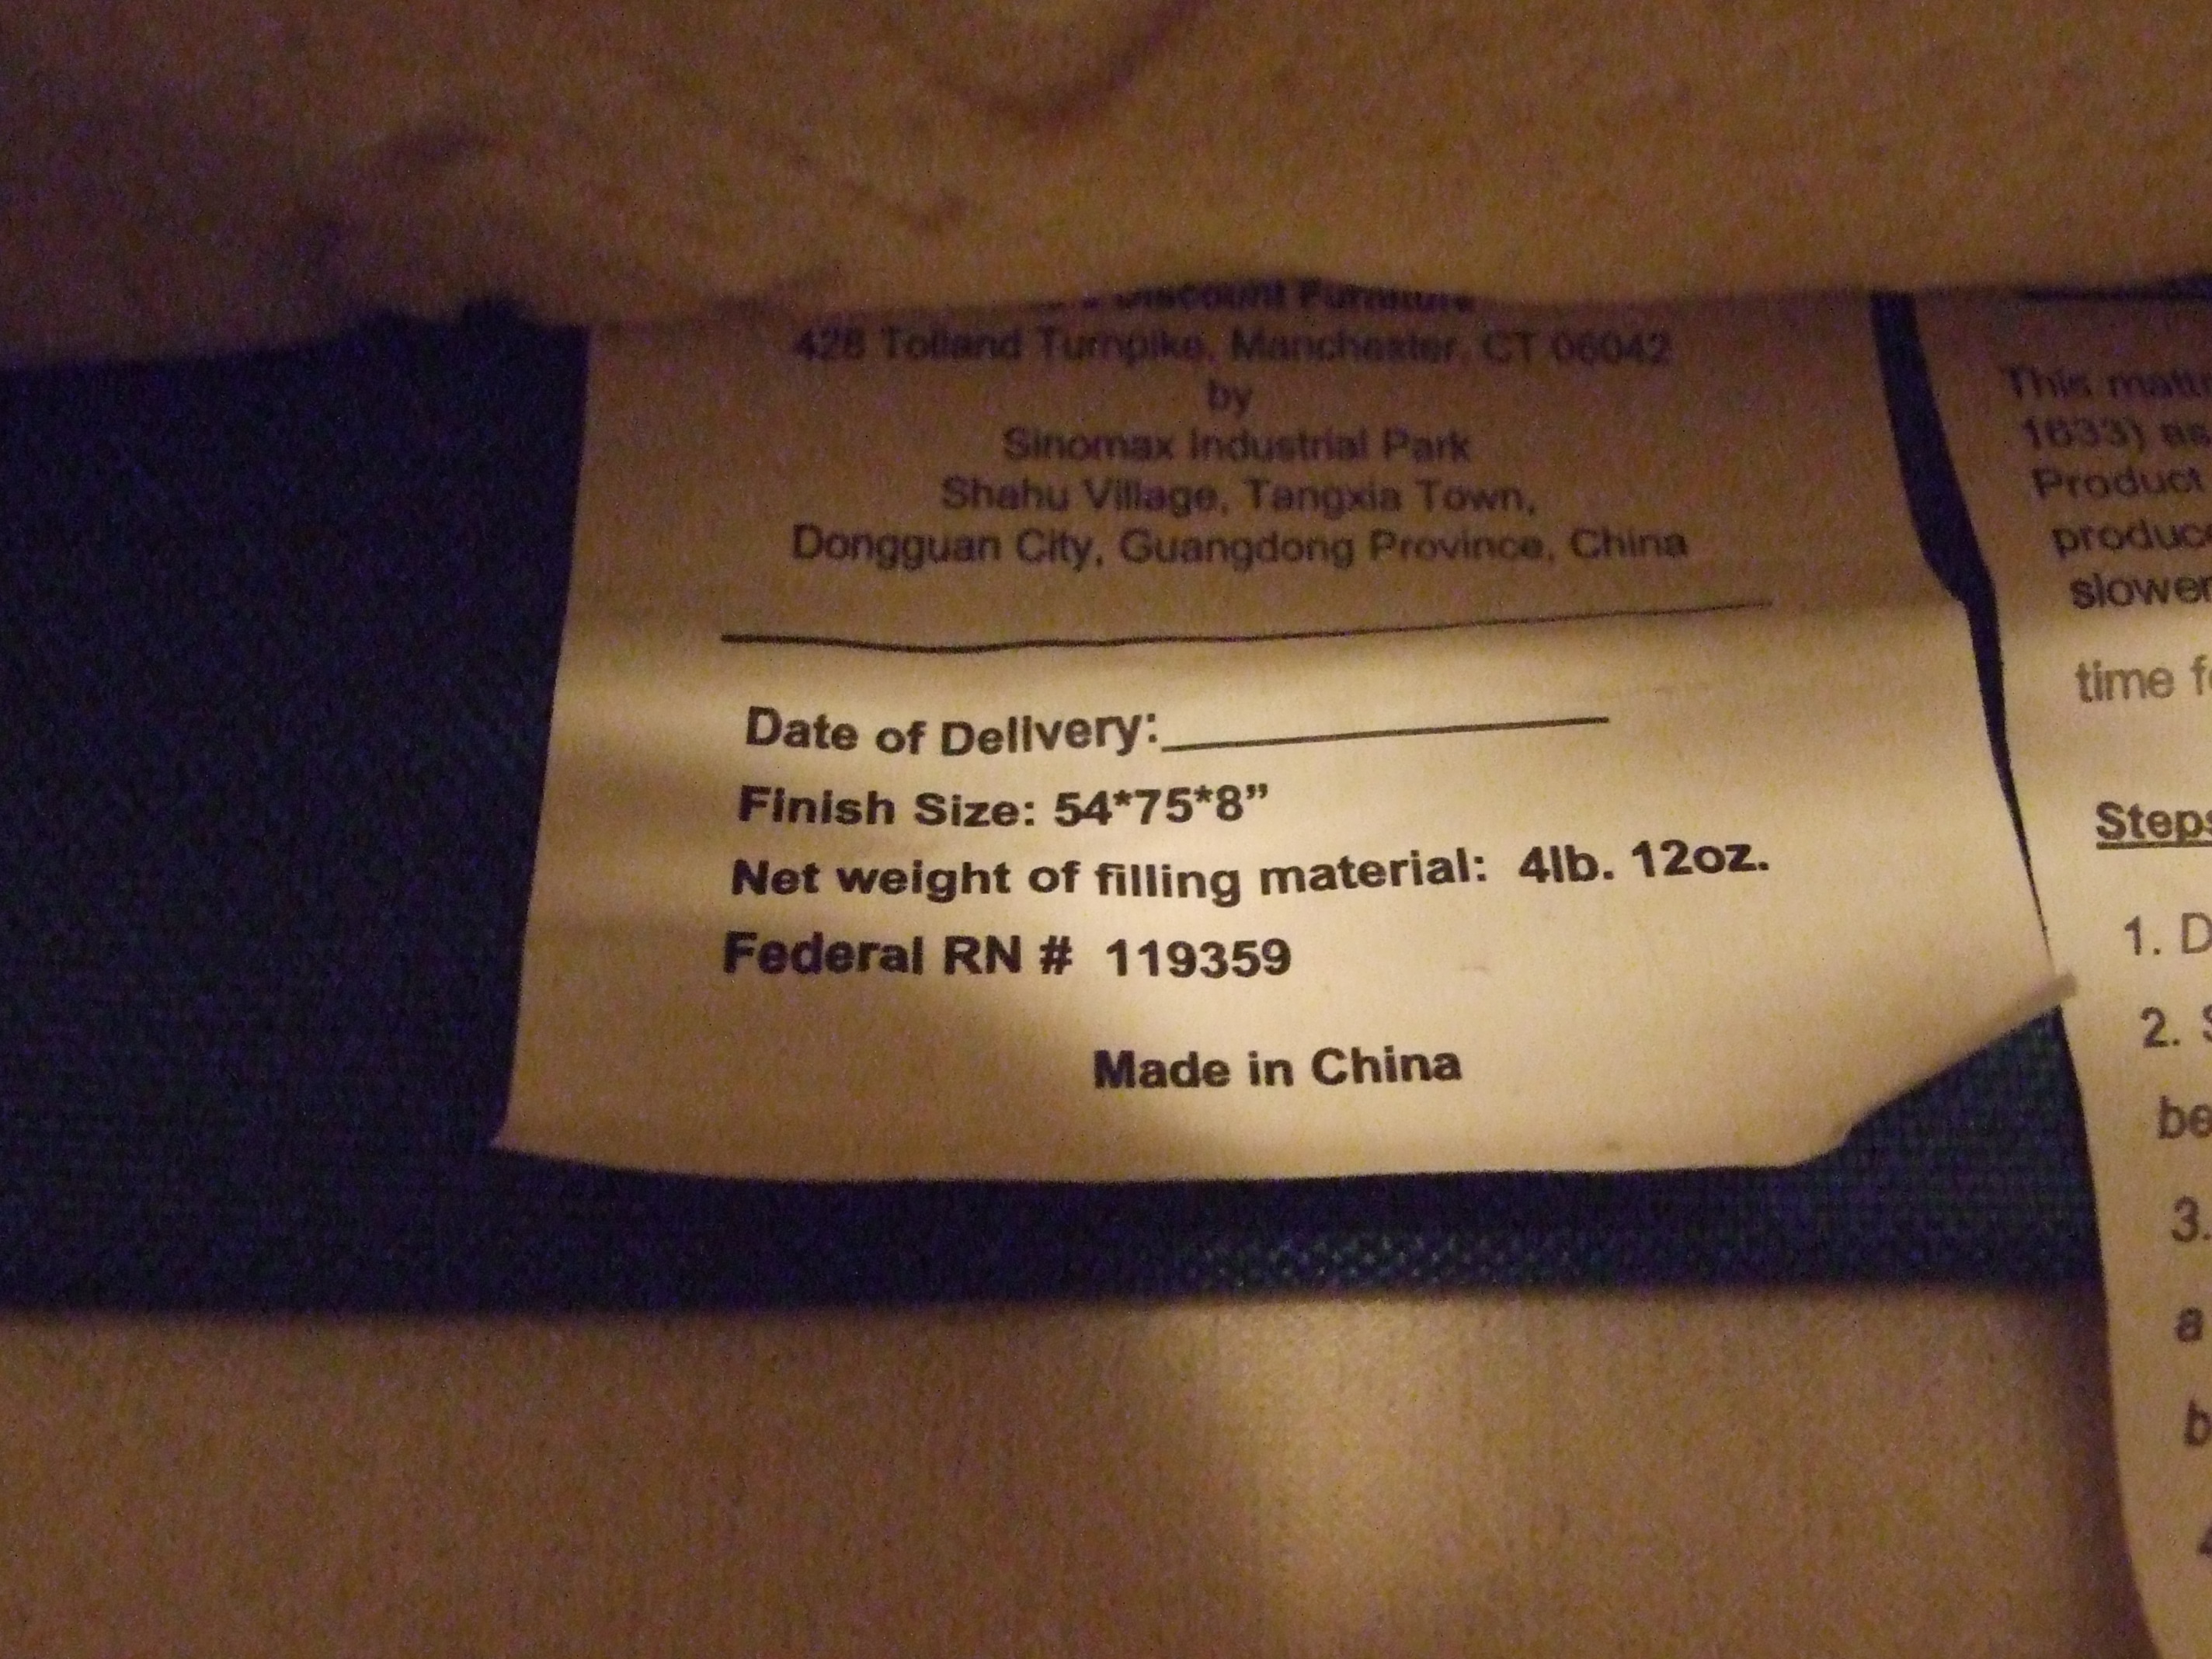 shows the tag on the mattress verifying the size